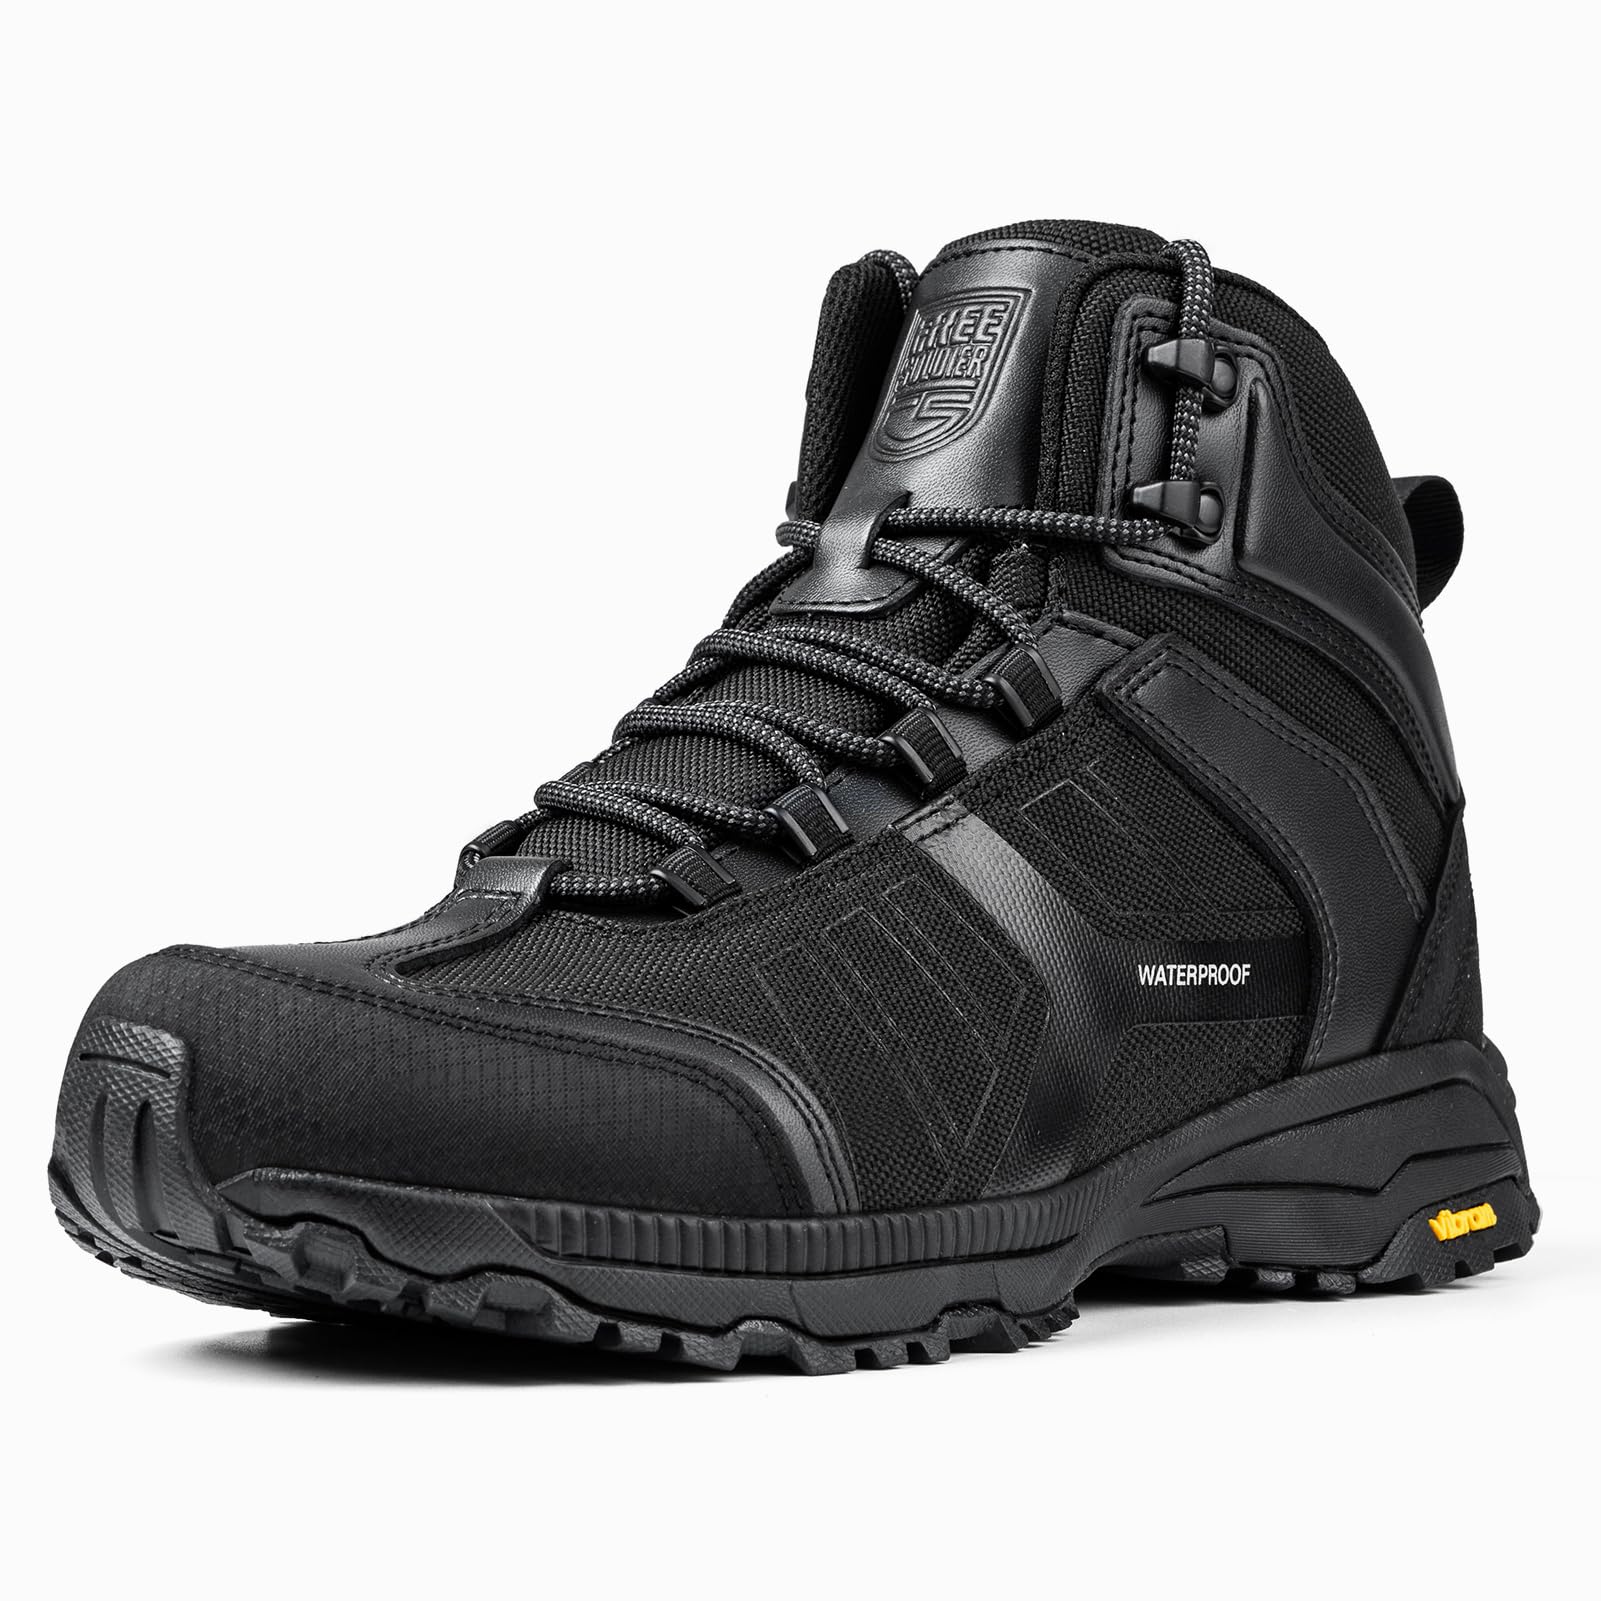 Black Panther Low-Cut Military Tactical Boots